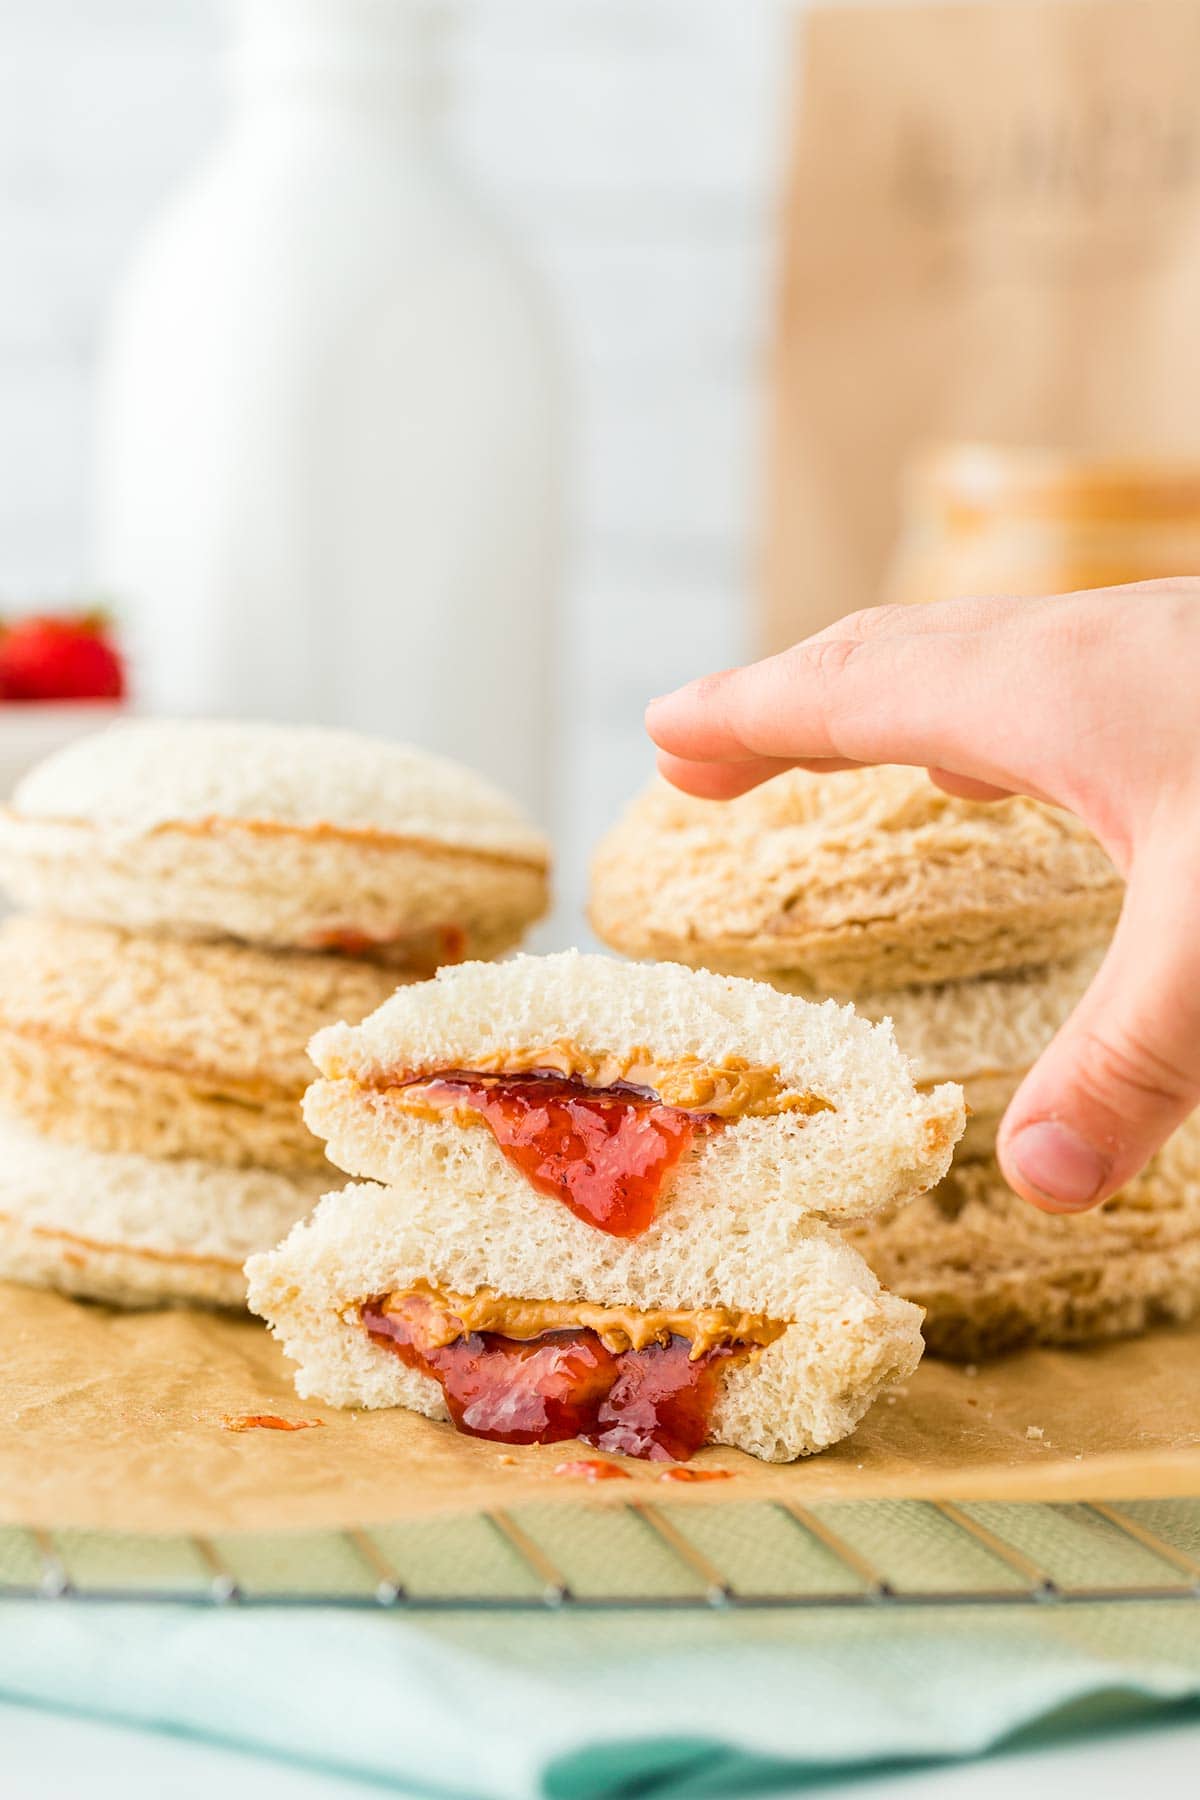 https://www.makeaheadmealmom.com/wp-content/uploads/2019/08/HomemadeUncrustables_WithHand_compressed.jpg